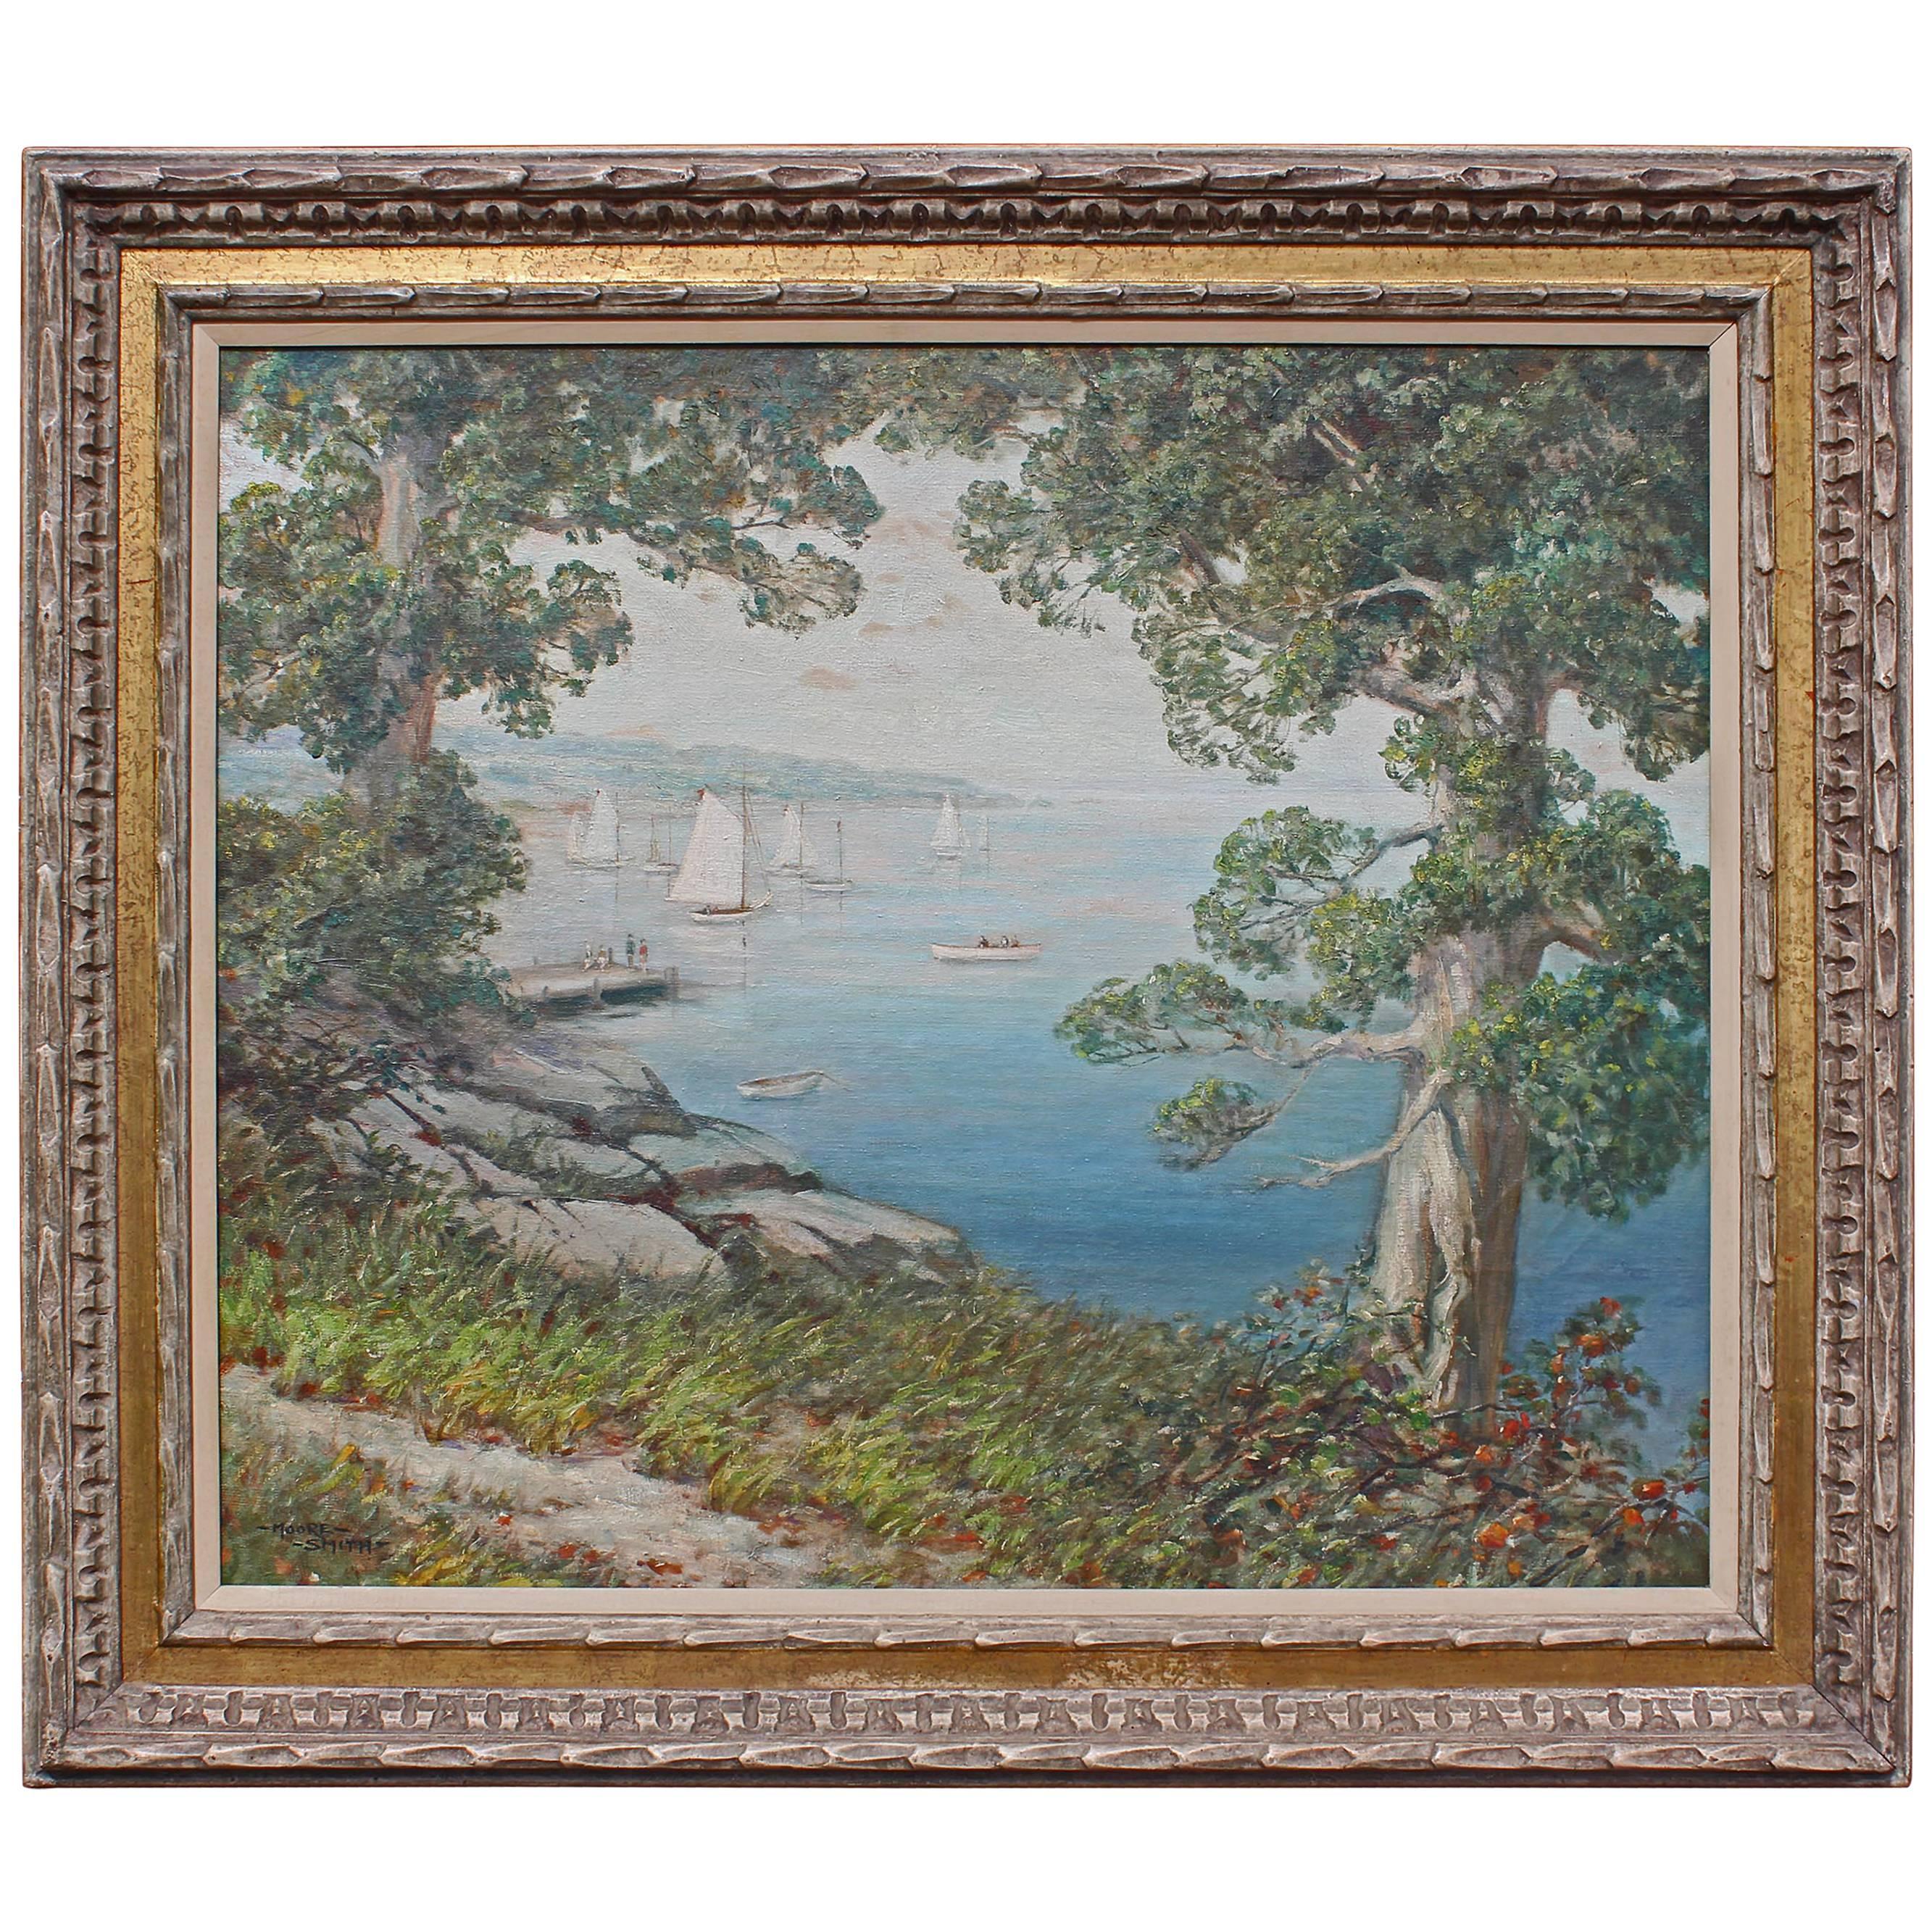 Summer on long island sound, large oil painting. Painted by Moore Smith (Connecticut 1890-). Painted circa 1920s. Oil on canvas. In original carved and gilt frame.